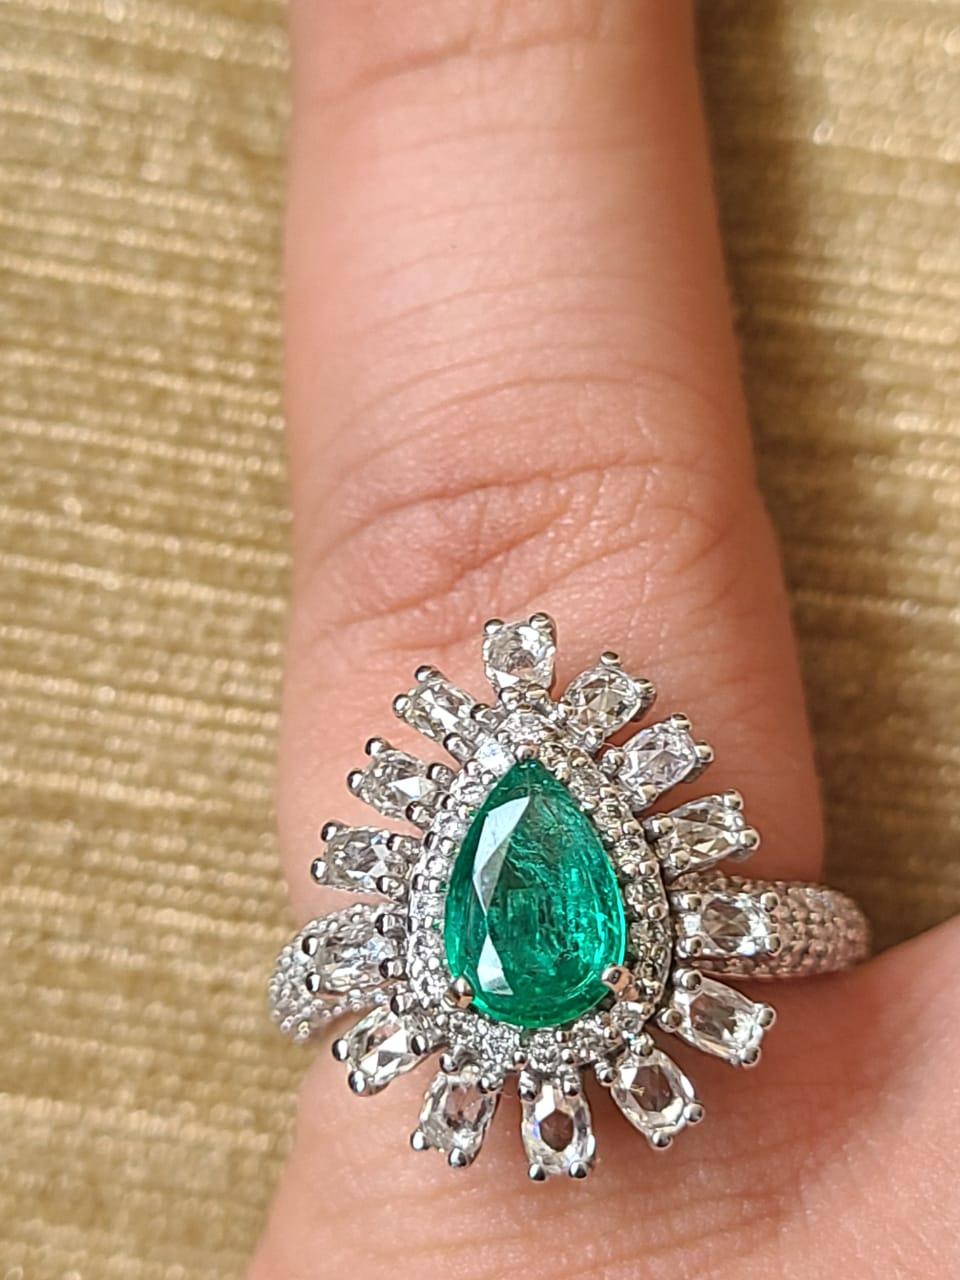 A very beautiful and one of a kind, Emerald Engagement Ring set in 18K White Gold & Diamonds. The weight of the Emerald us 0.87 carats. The pear shaped Emerald is completely natural, without any treatment and is of Zambian origin. The weight of the